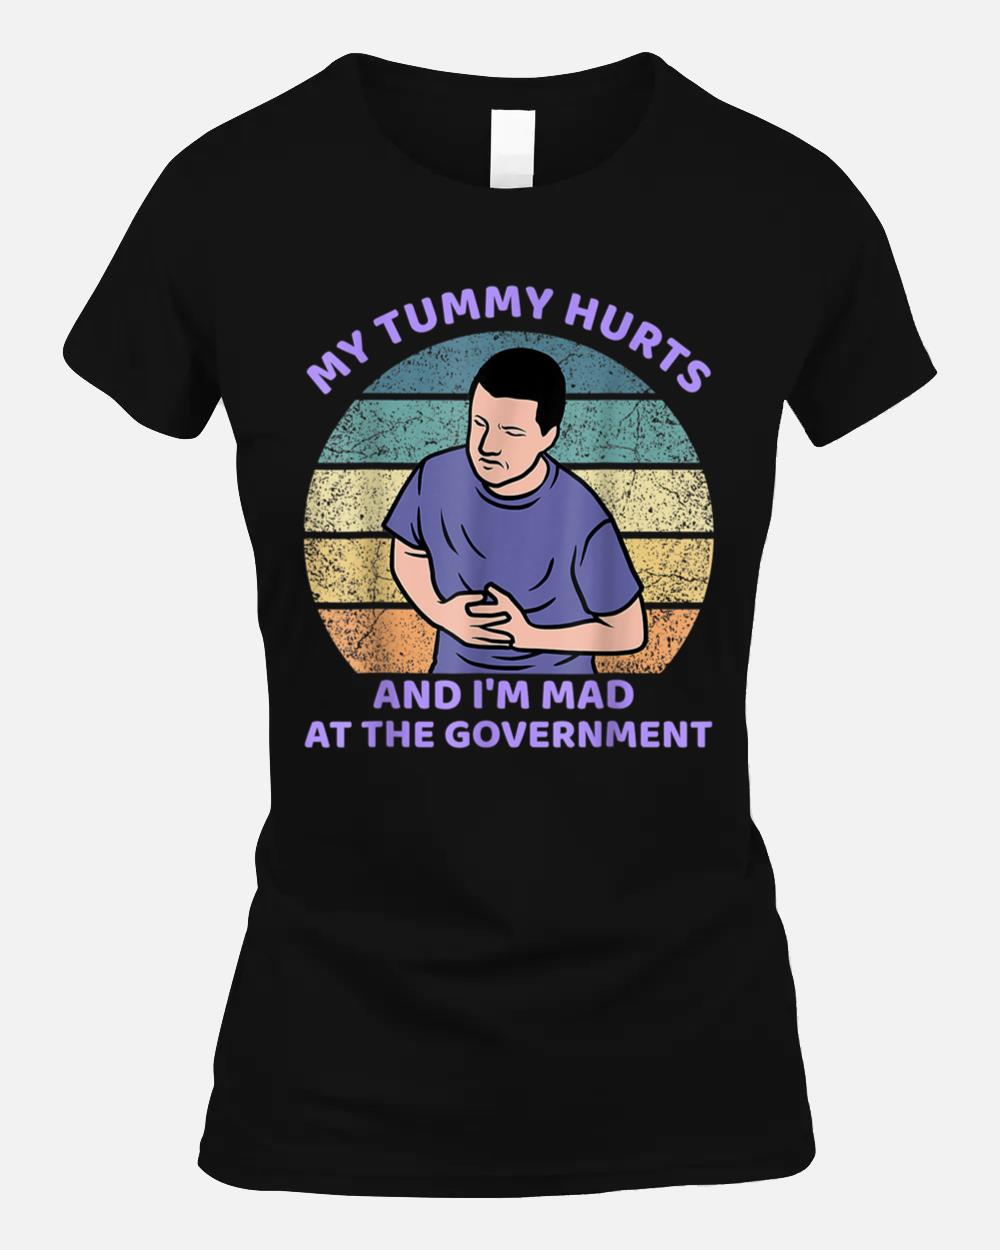 My Tummy Hurts And I'm Mad At The Government_2 Unisex T-Shirt